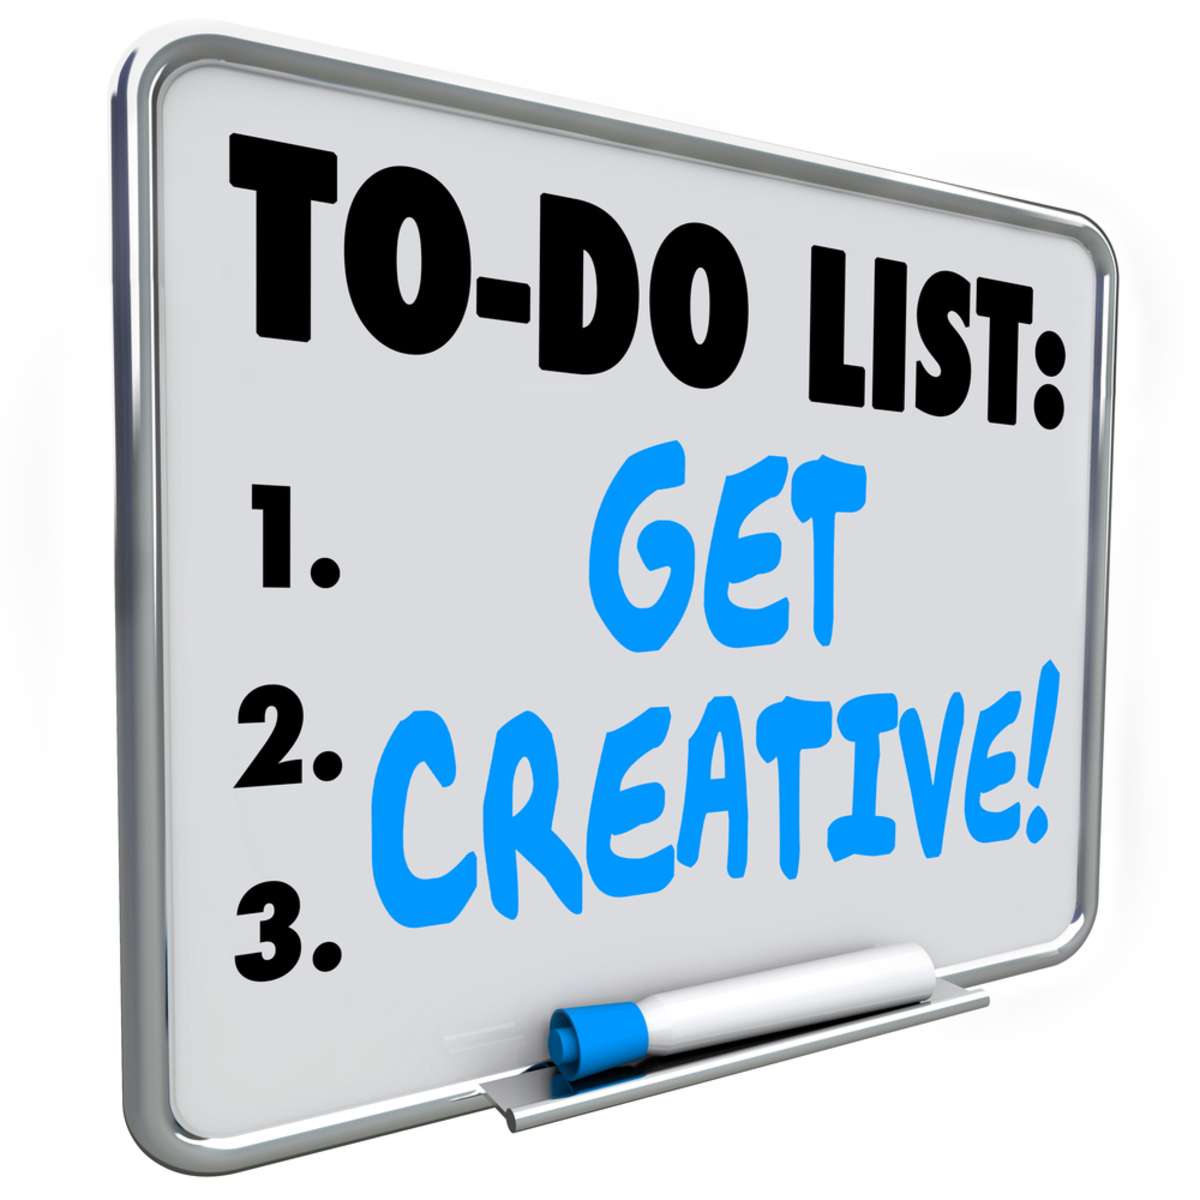 Get Creative words on a to do list written on a dry erase board to encourage inventive, fresh, original thinking